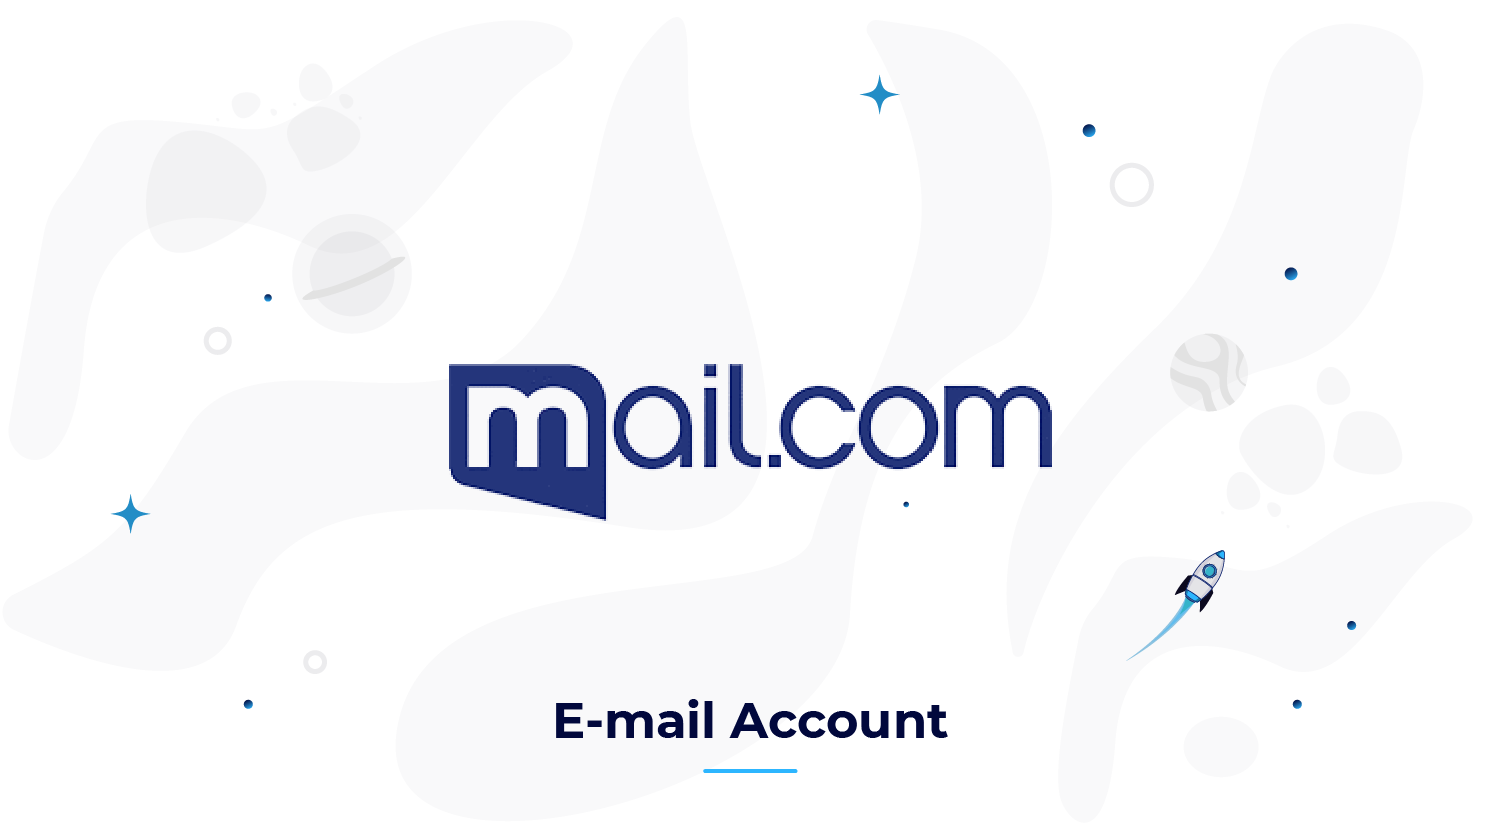 Mail.com Email Account